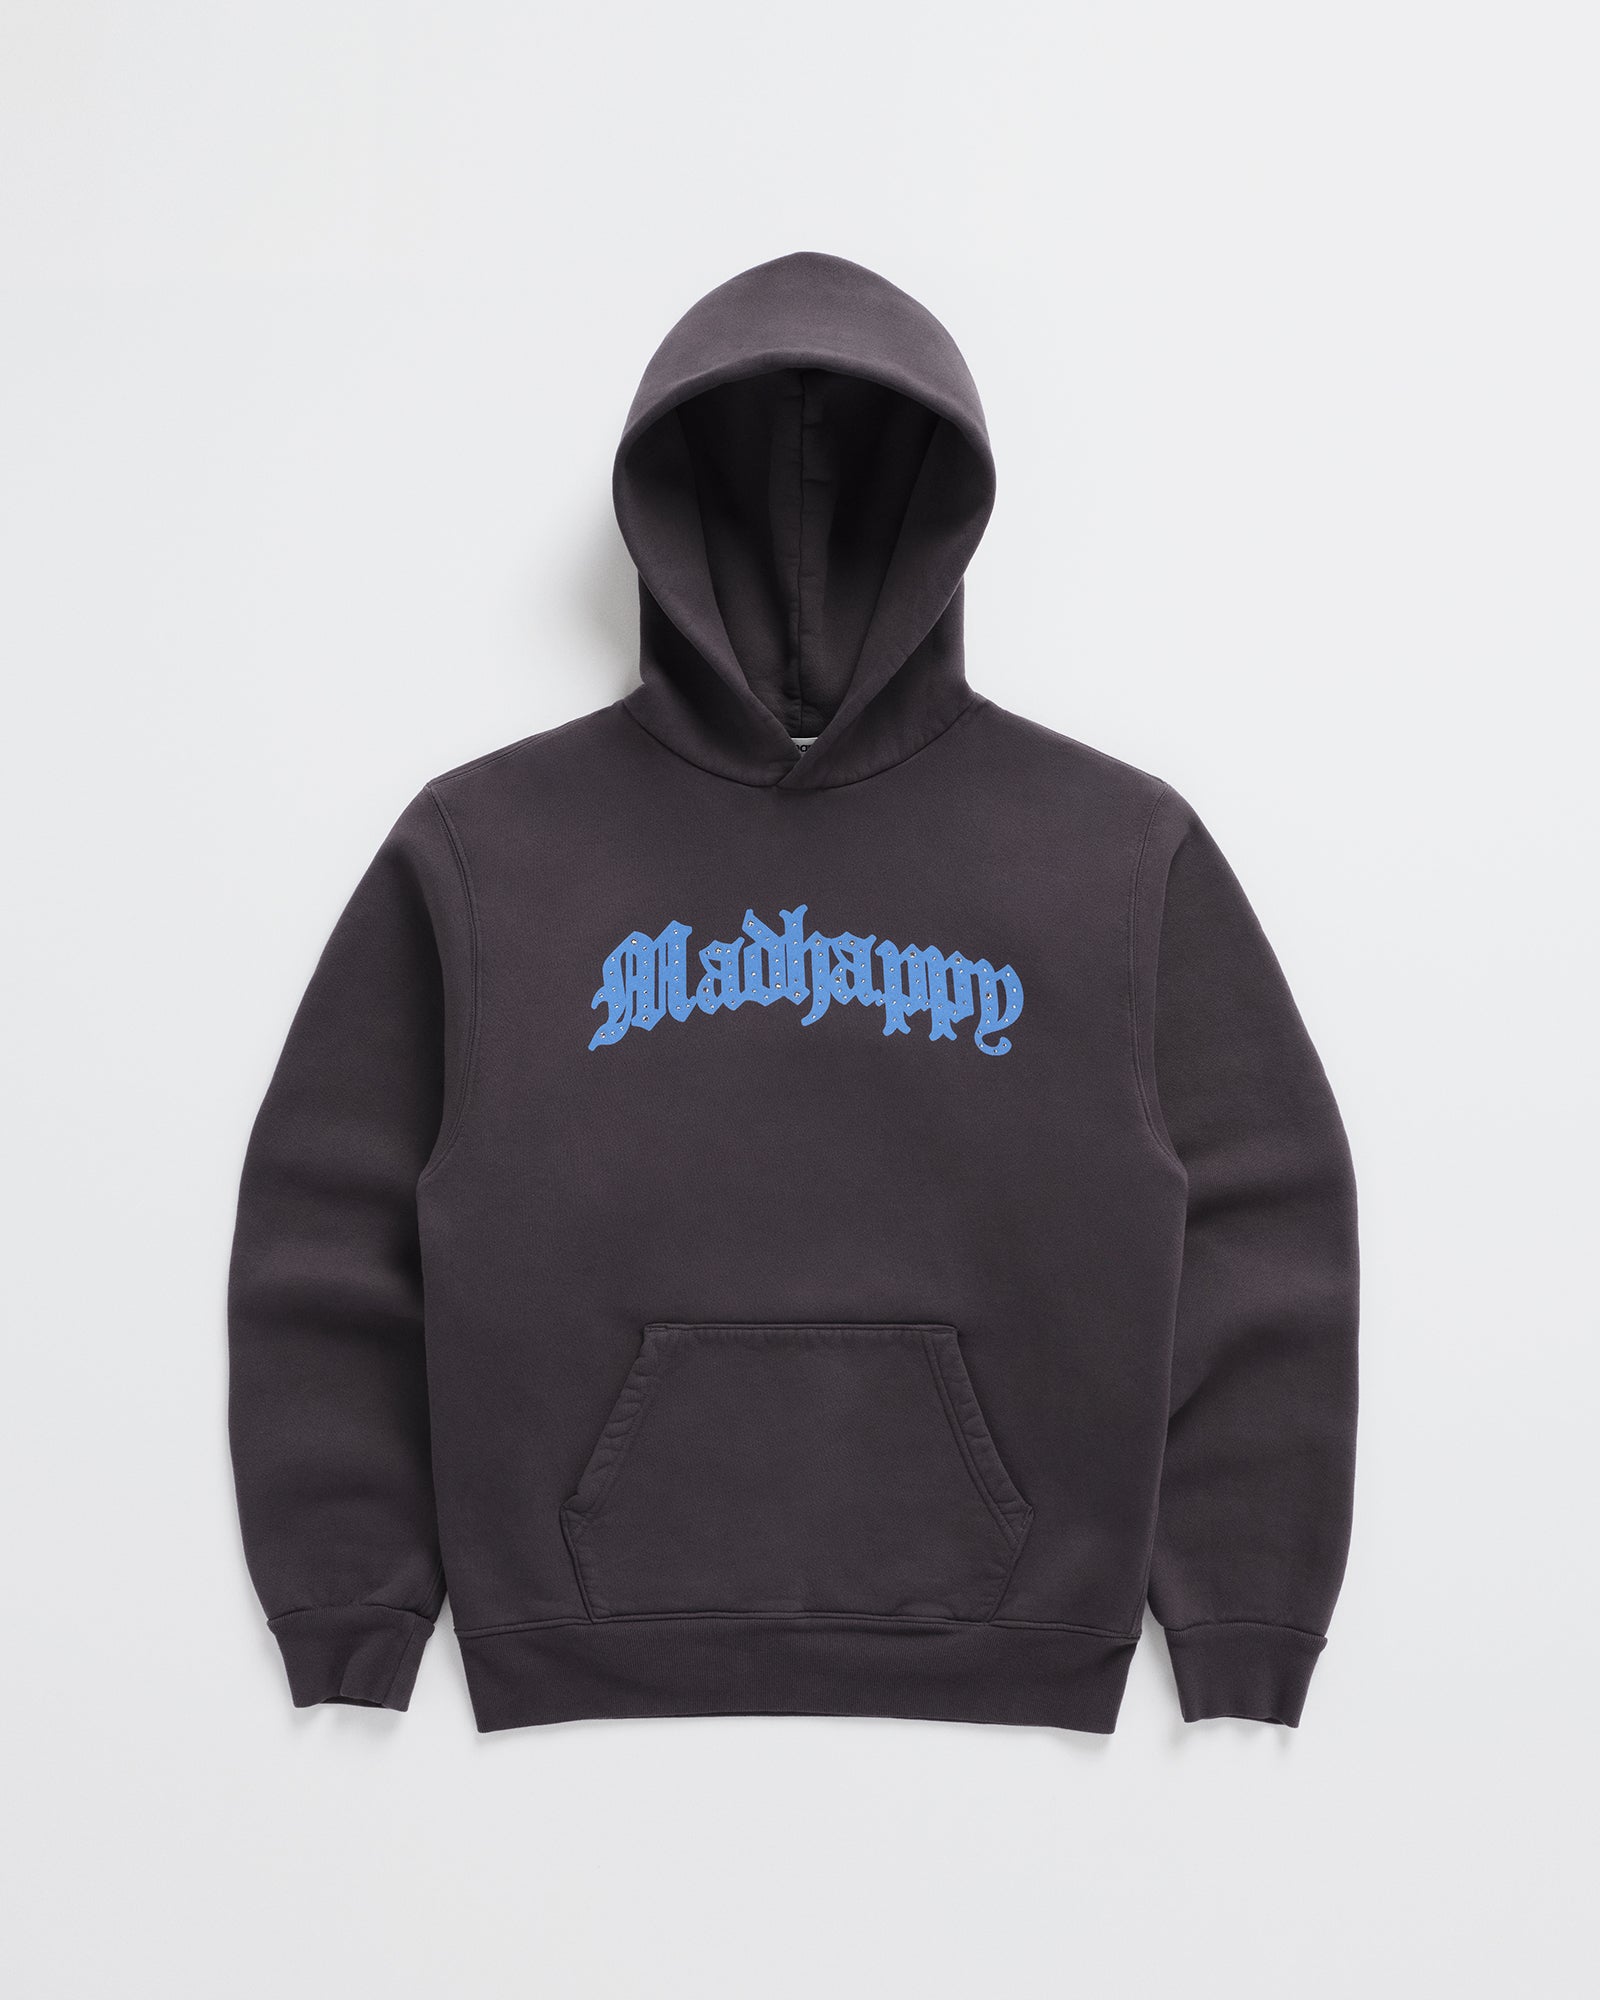 NEW ARRIVALS – Madhappy JP